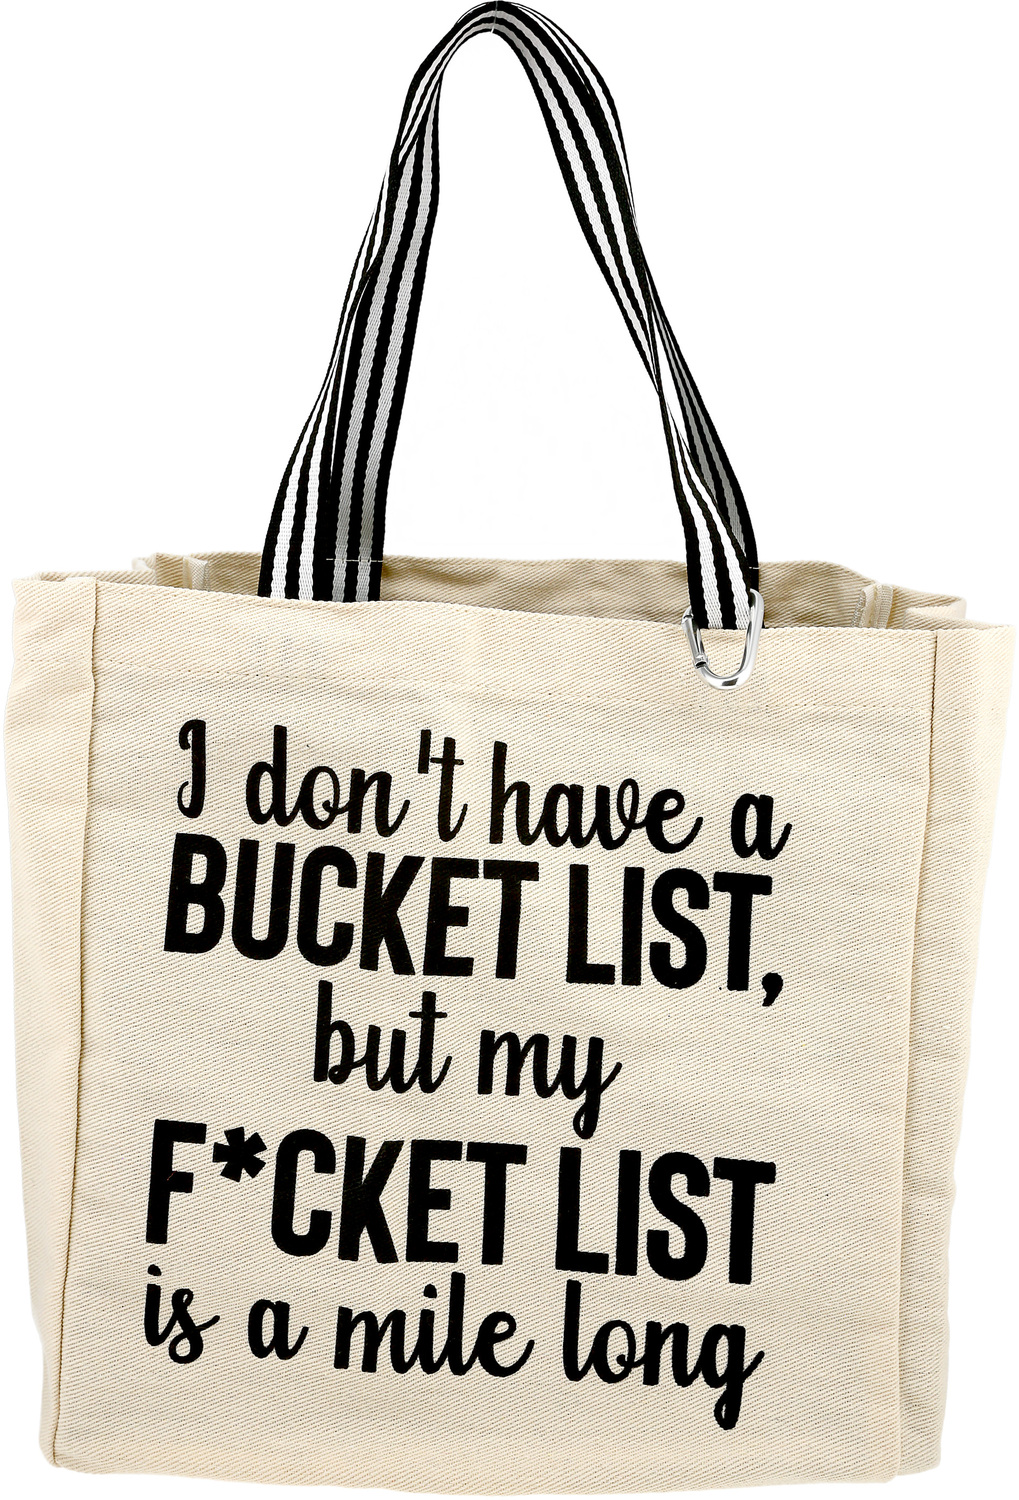 Bucket List by Check Me Out - Bucket List - 100% Cotton Twill Gift Bag